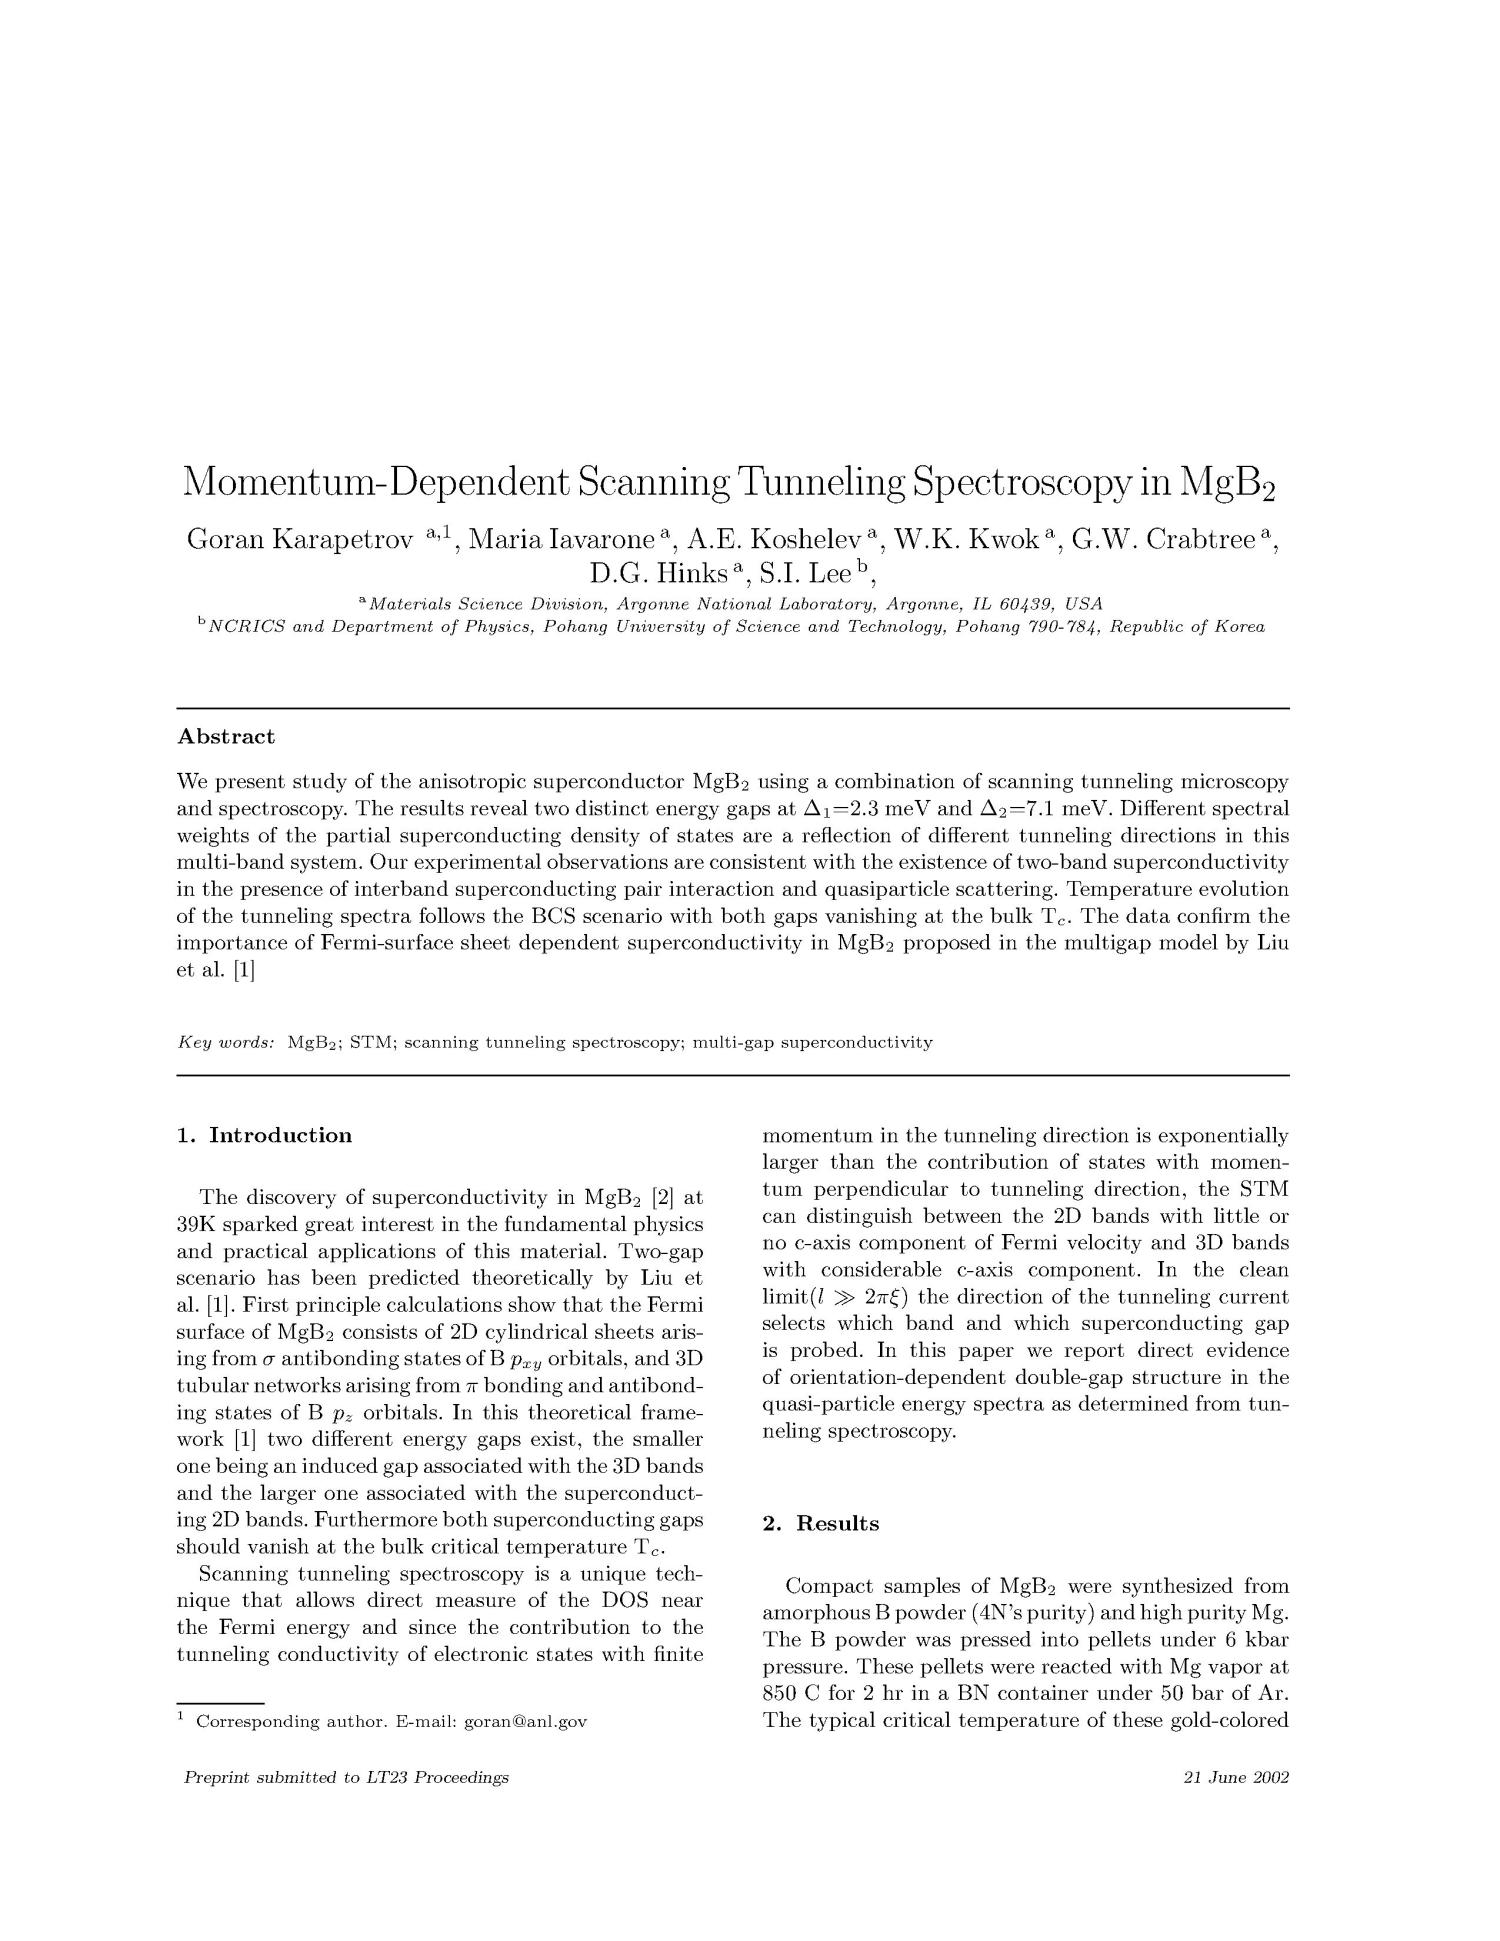 Momentum-dependent scanning tunneling spectroscopy in MgB{sub 2}.
                                                
                                                    [Sequence #]: 2 of 3
                                                